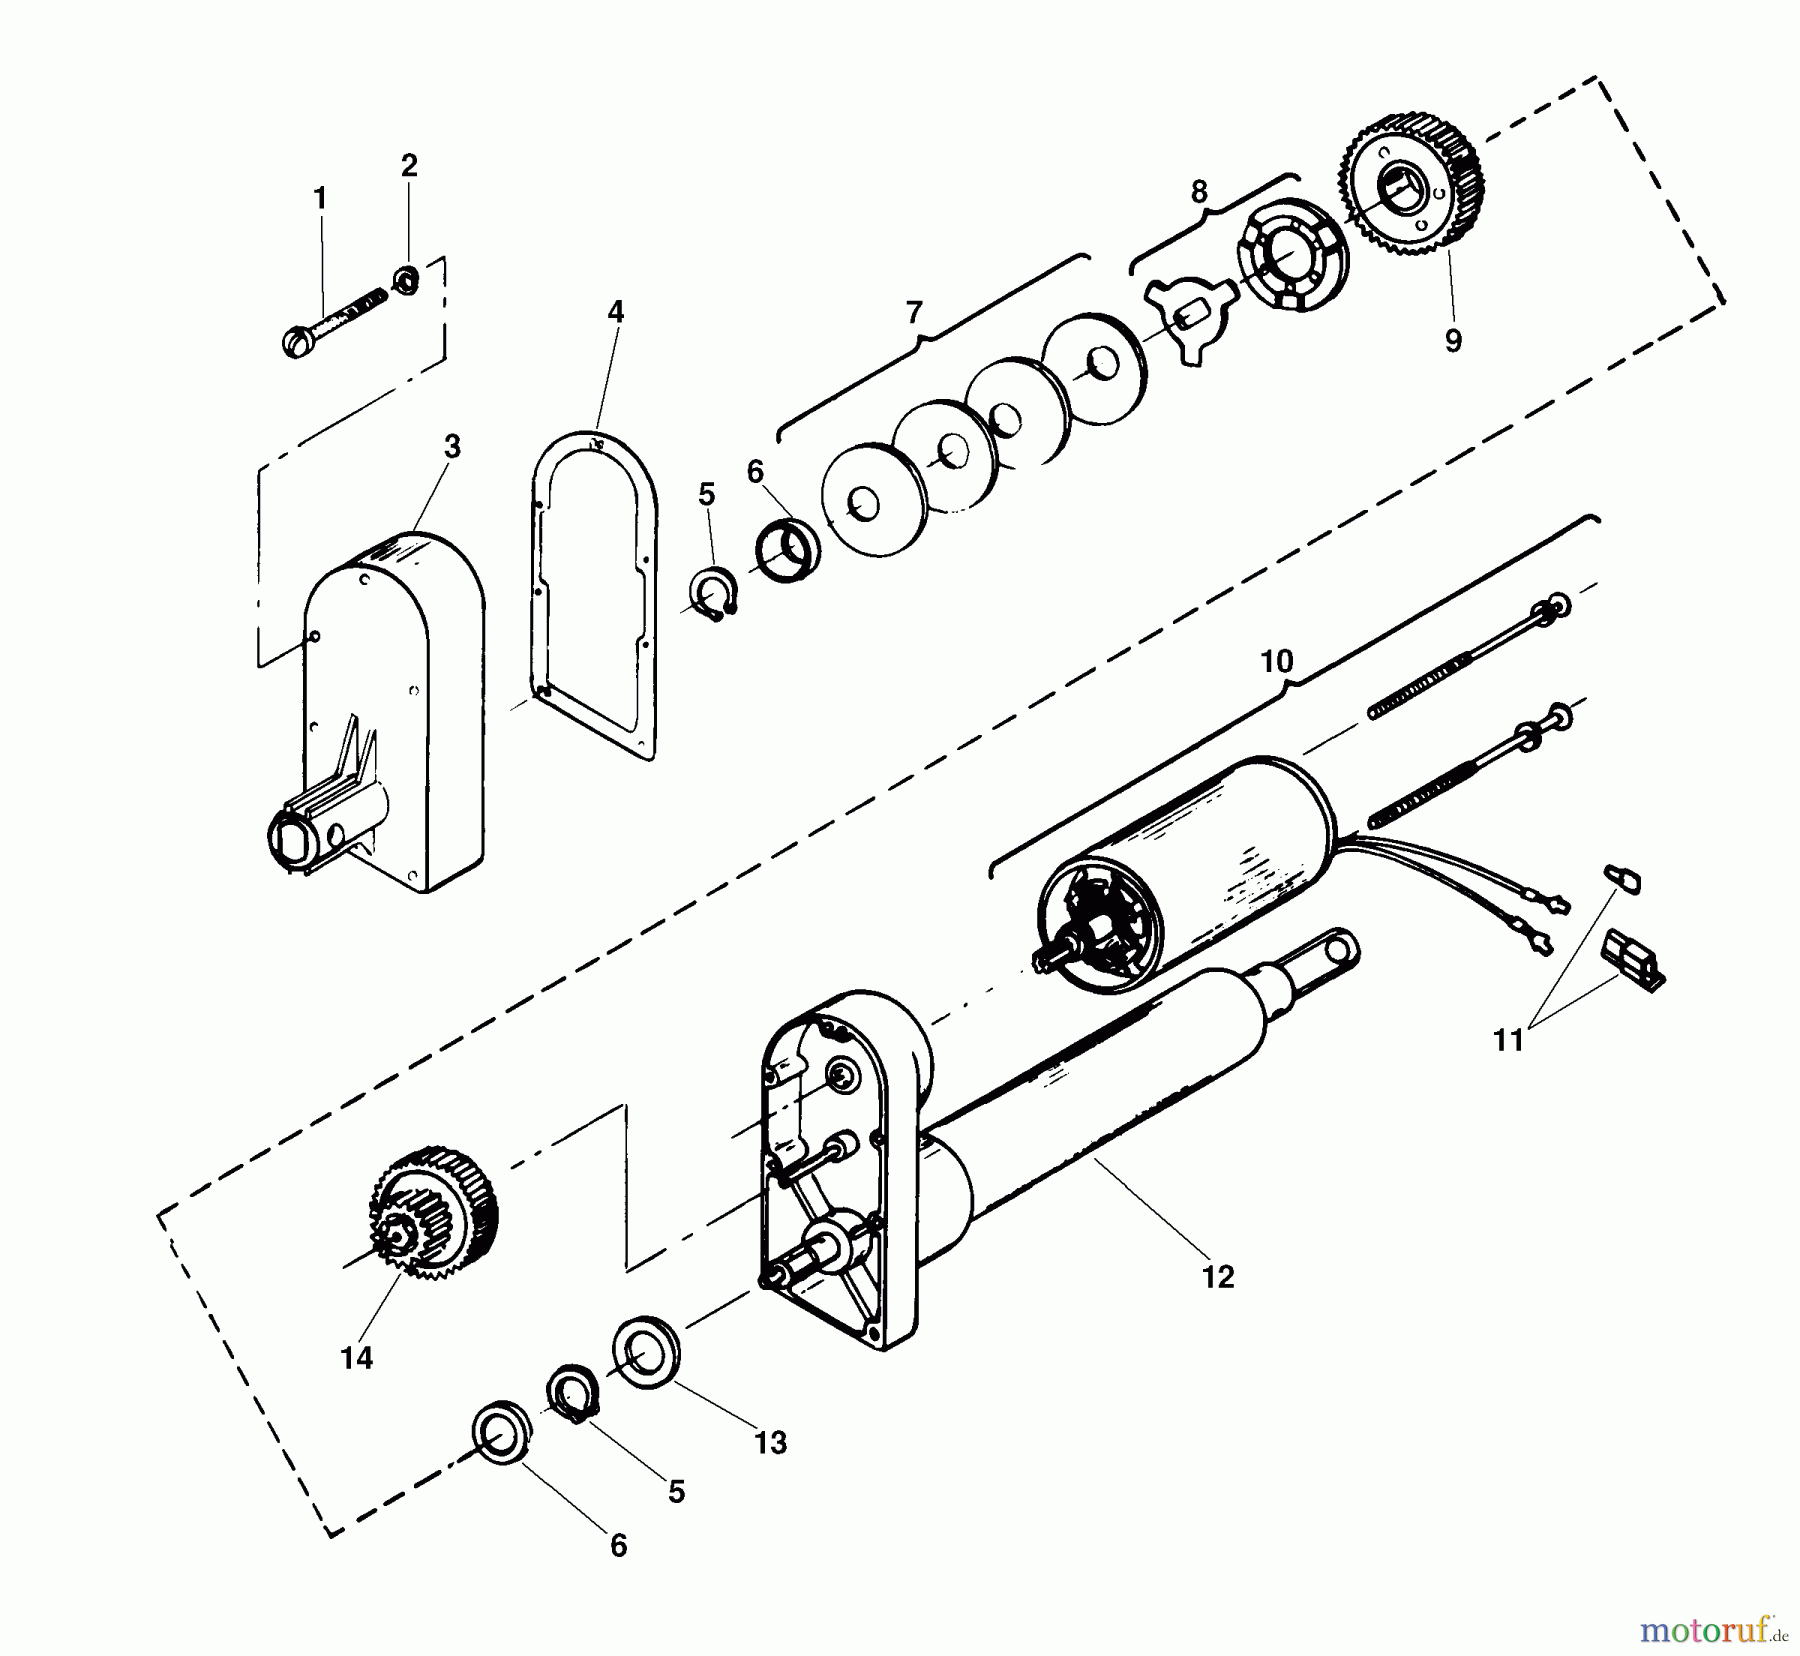  Husqvarna Zubehör, Rasenmäher / Mäher EAV 20A - Husqvarna Electric Lift Kit for Hydro Tractors W/Top Mounted Pulley (2001-05 & After) Actuator